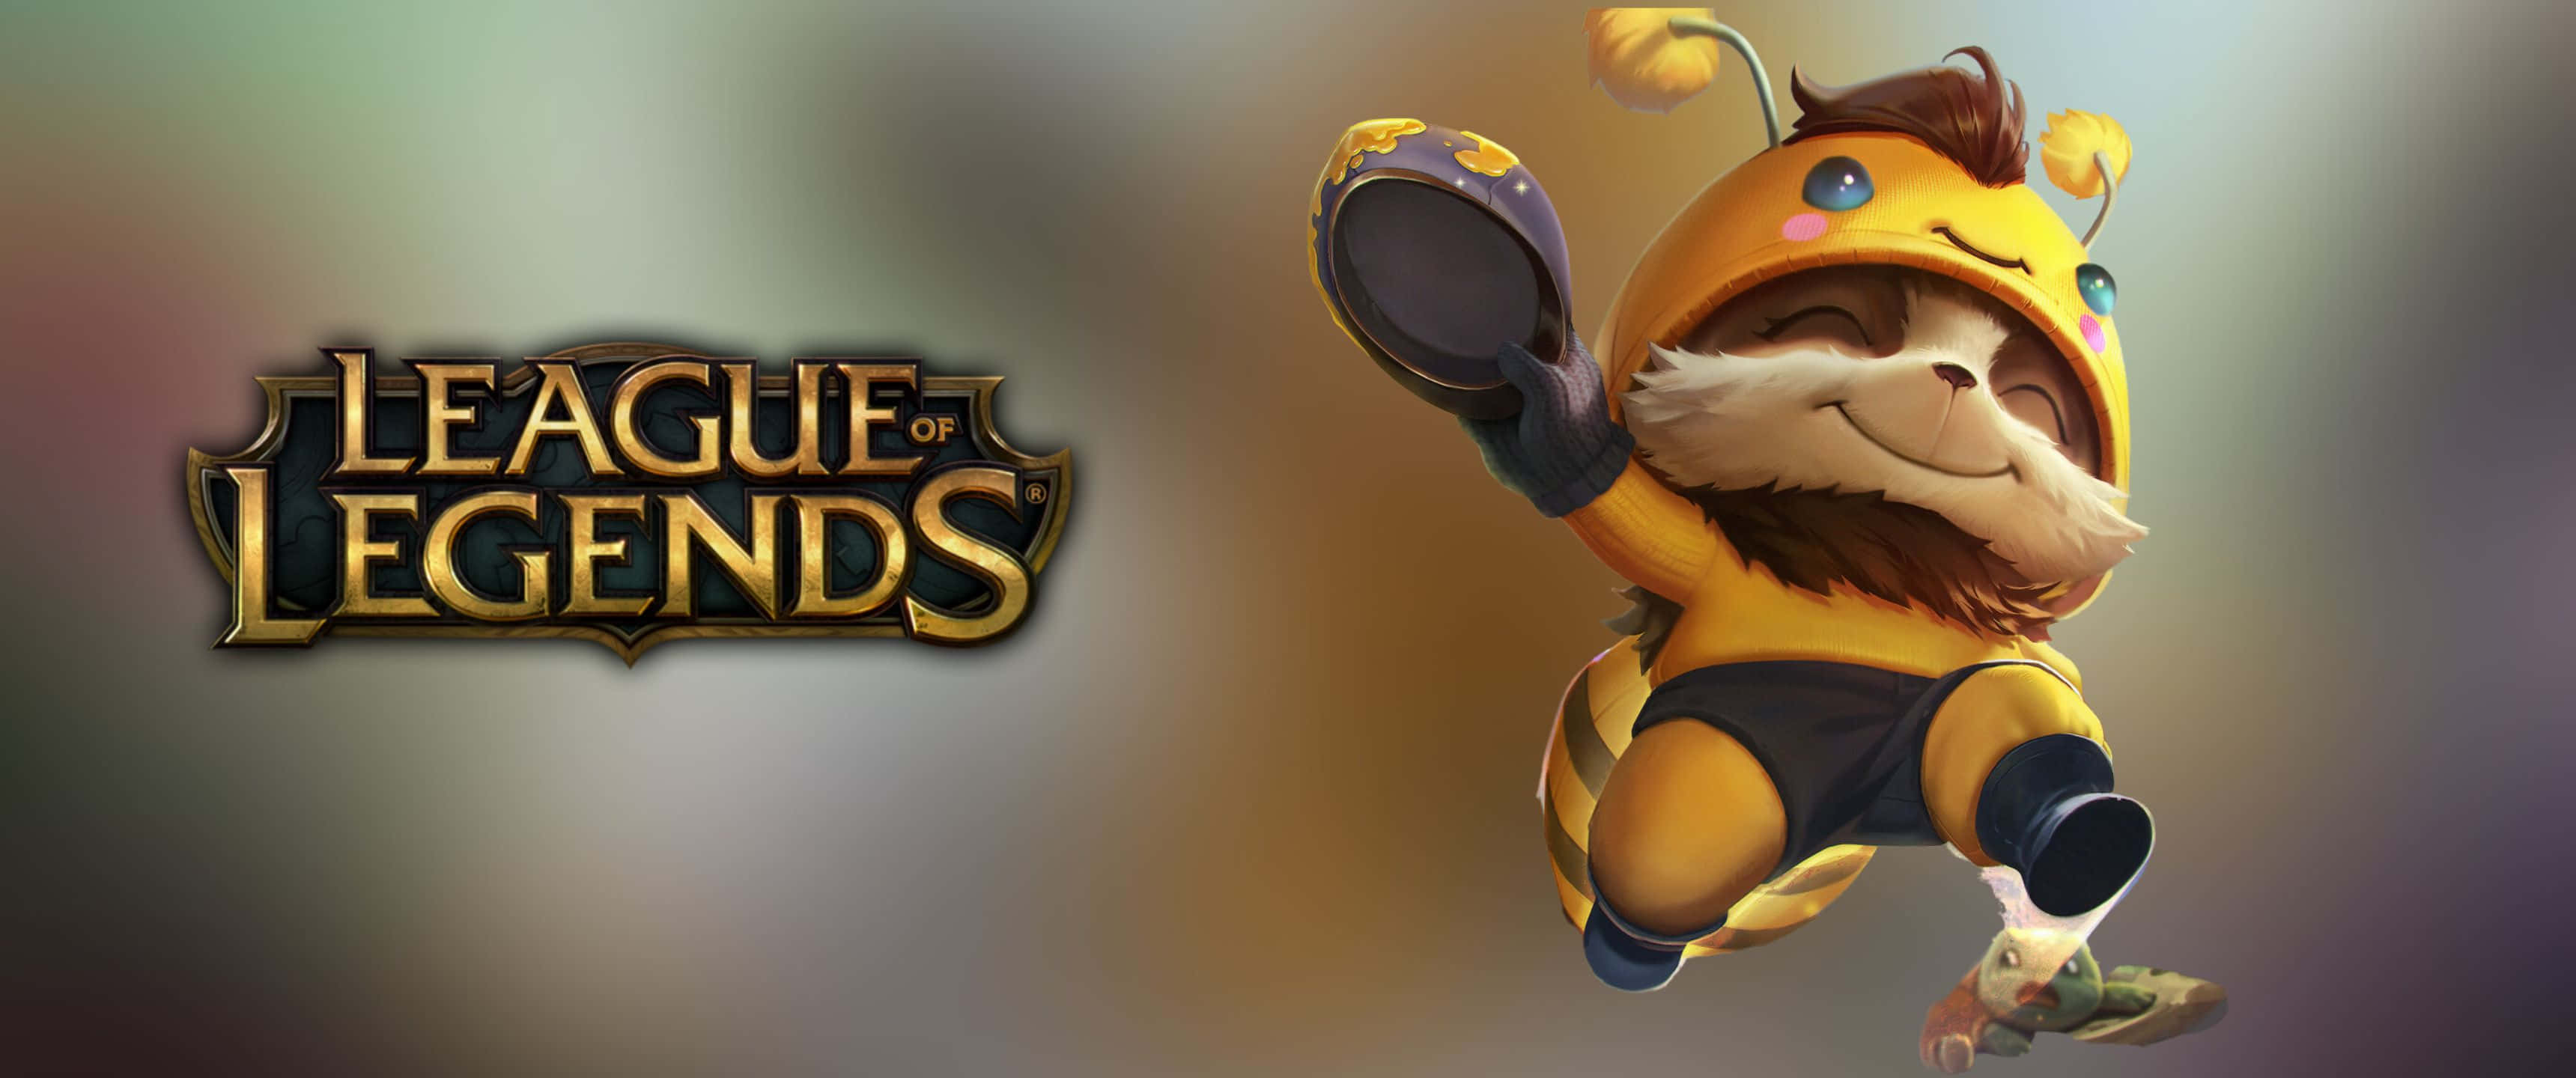 Beemo 3440x1440p League Of Legends Background